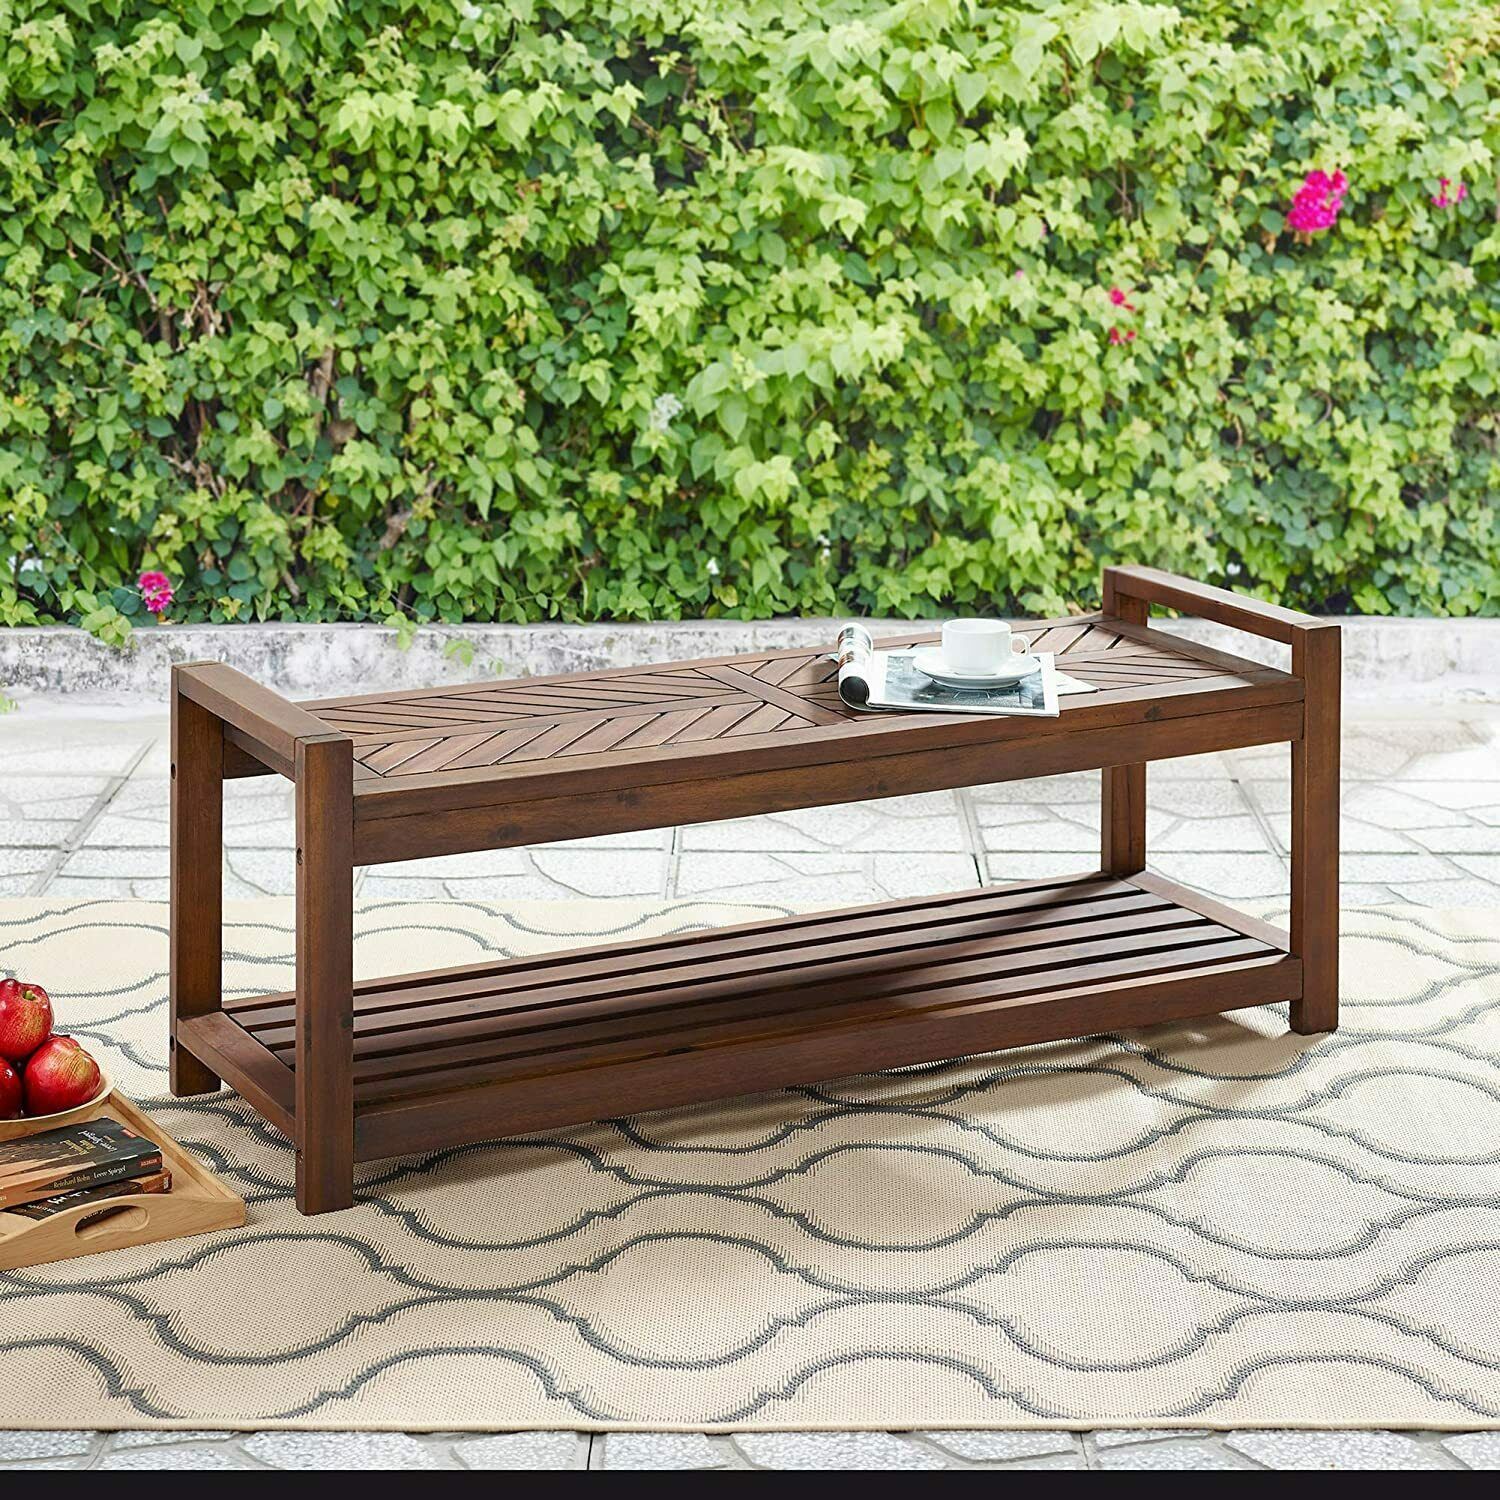 48" Outdoor Patio Chevron All Weather Wood Dining Bench by Walker Edison